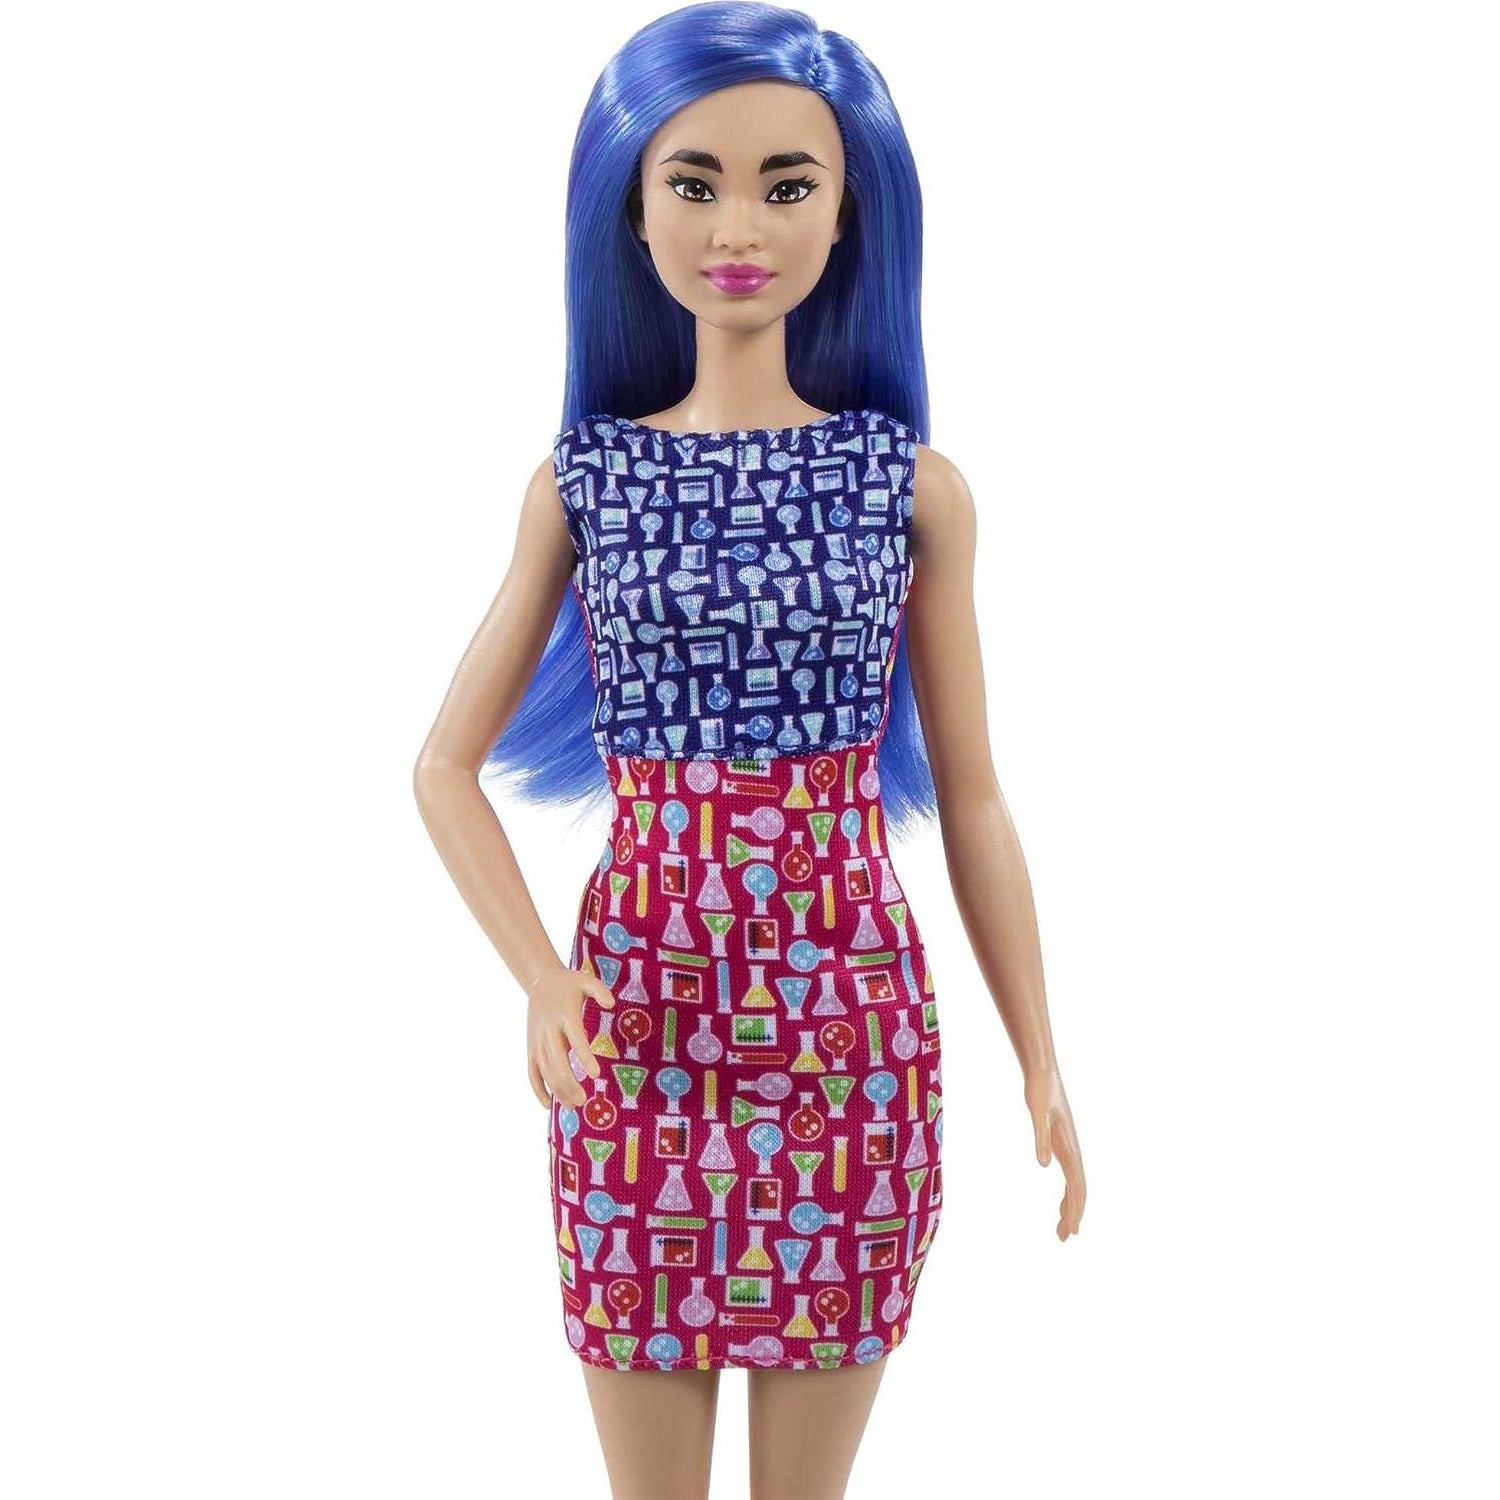 Barbie You Can Be Anything - Scientist Doll